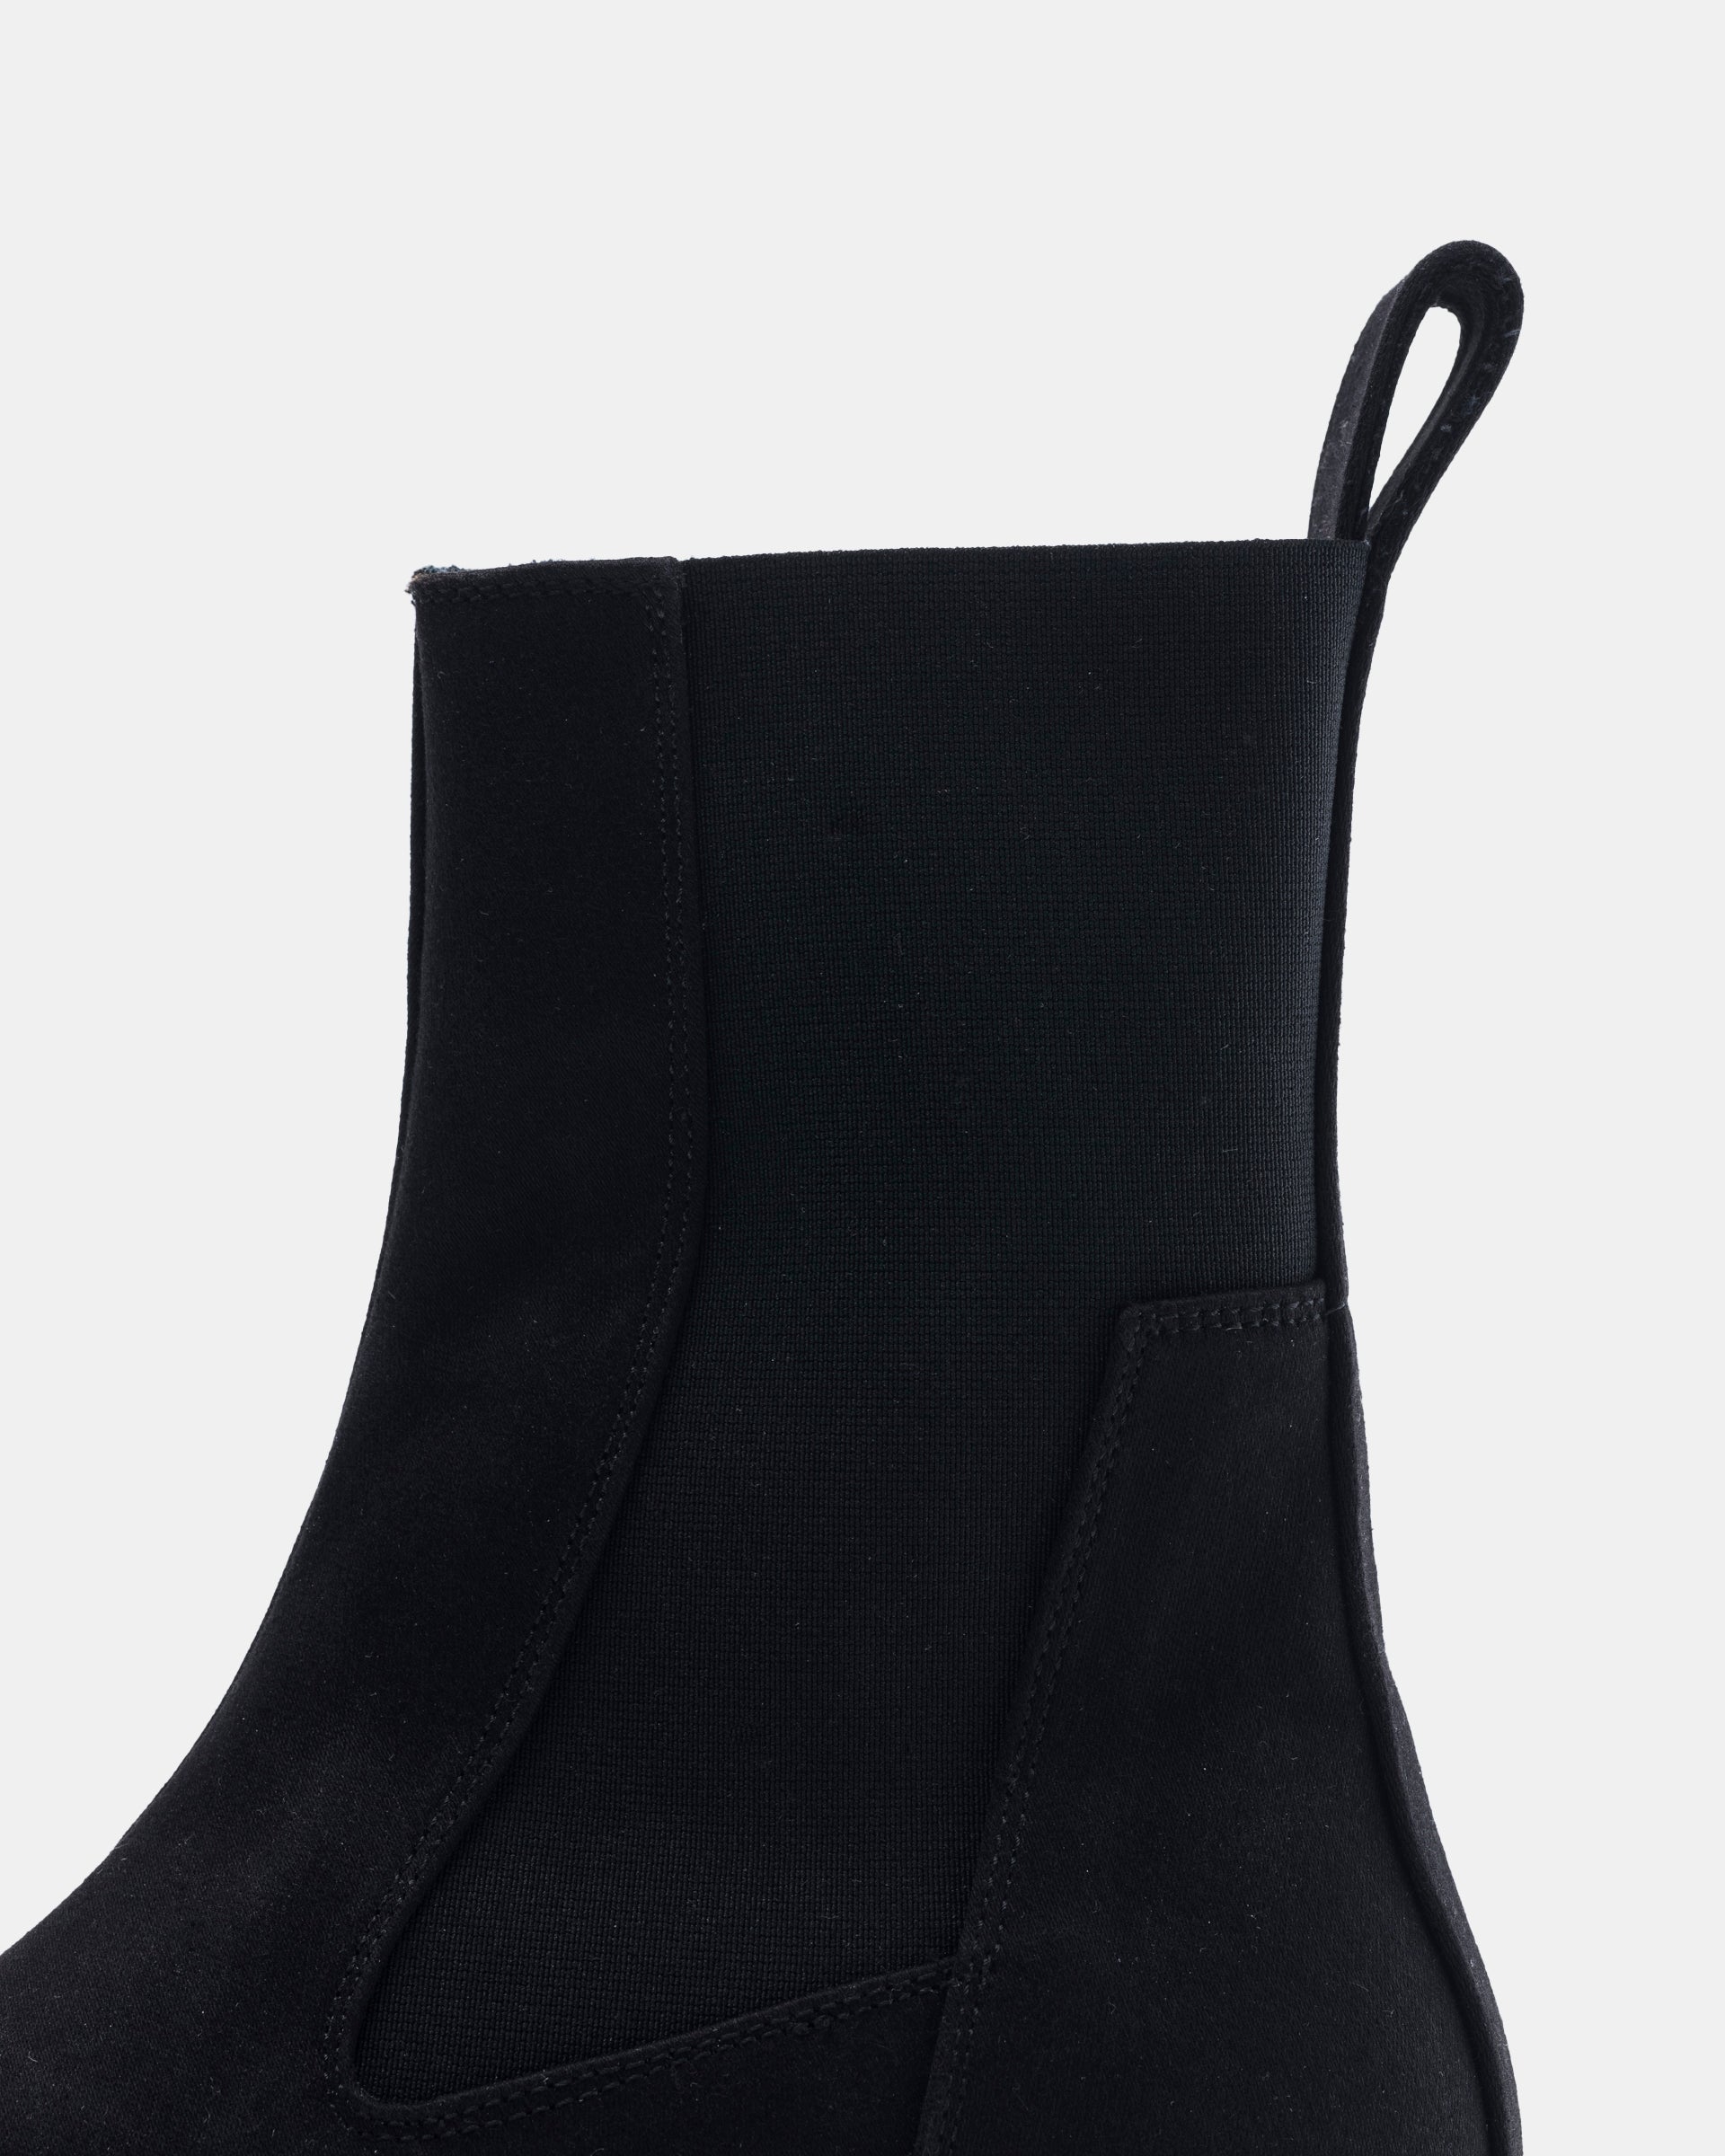 Rick Owens Black Beatle Abstract Boots on white background